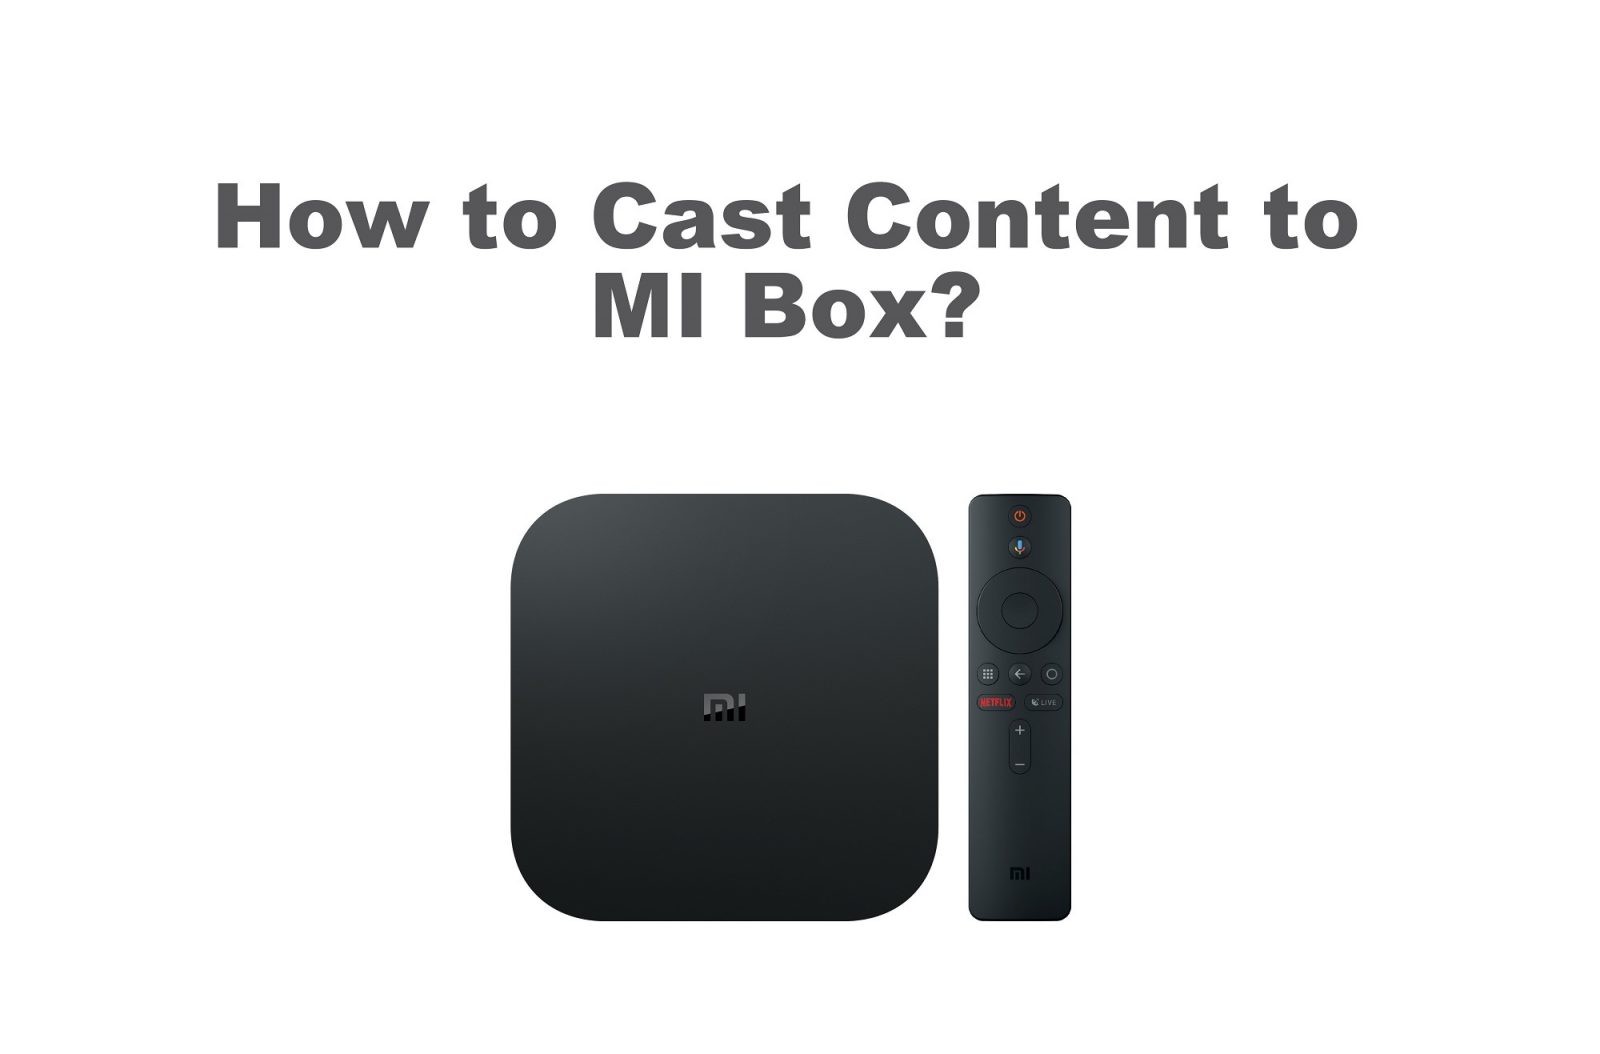 How to Cast Content to MI Box